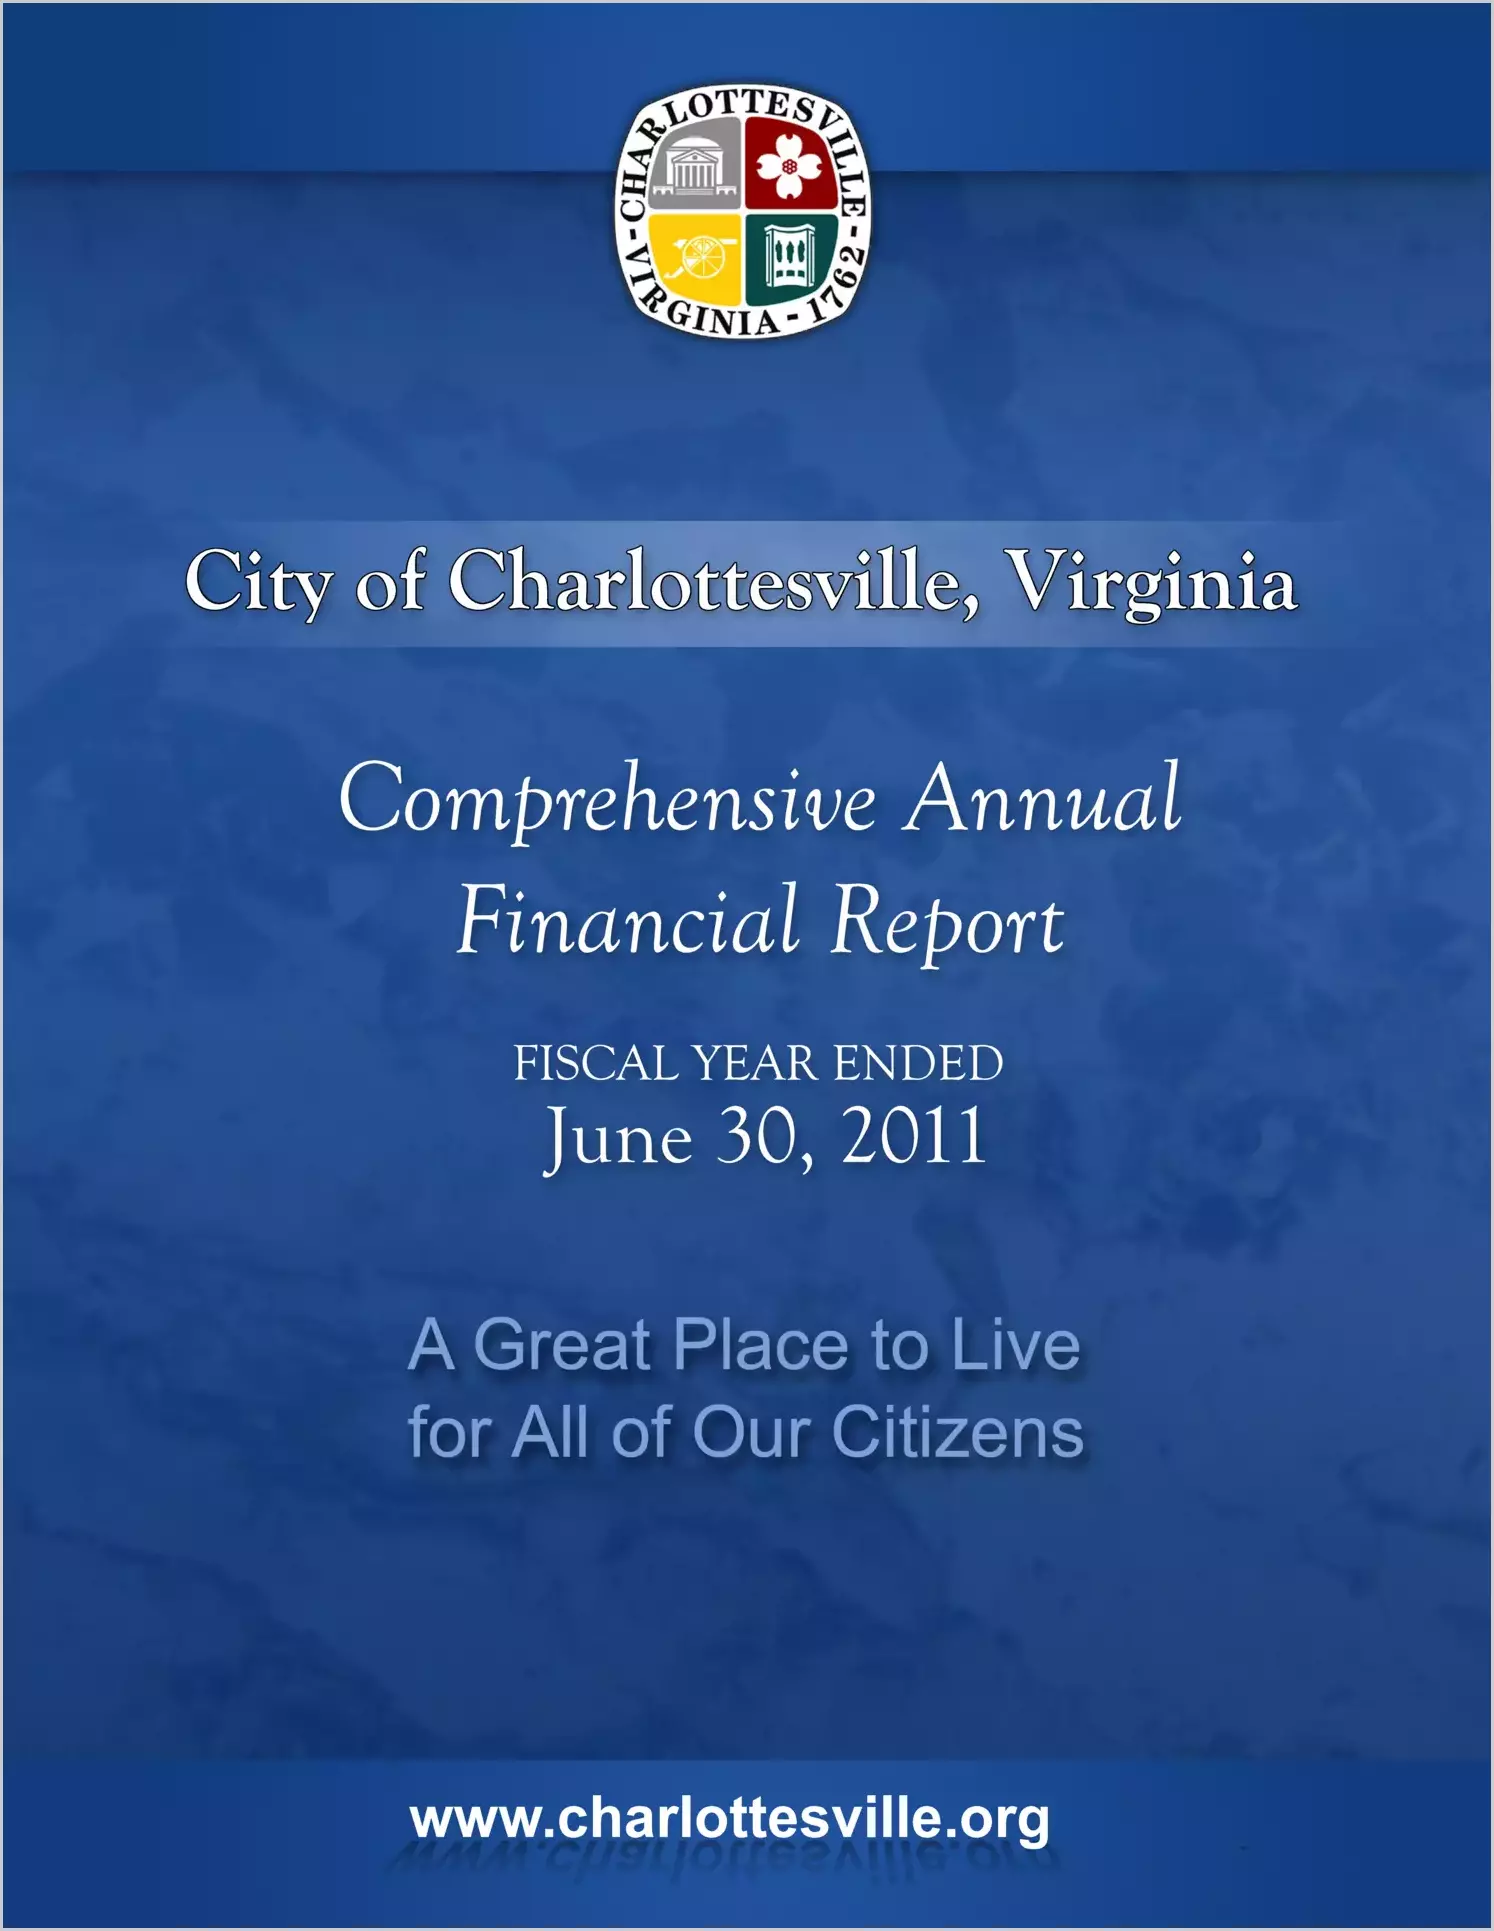 2011 Annual Financial Report for City of Charlottesville